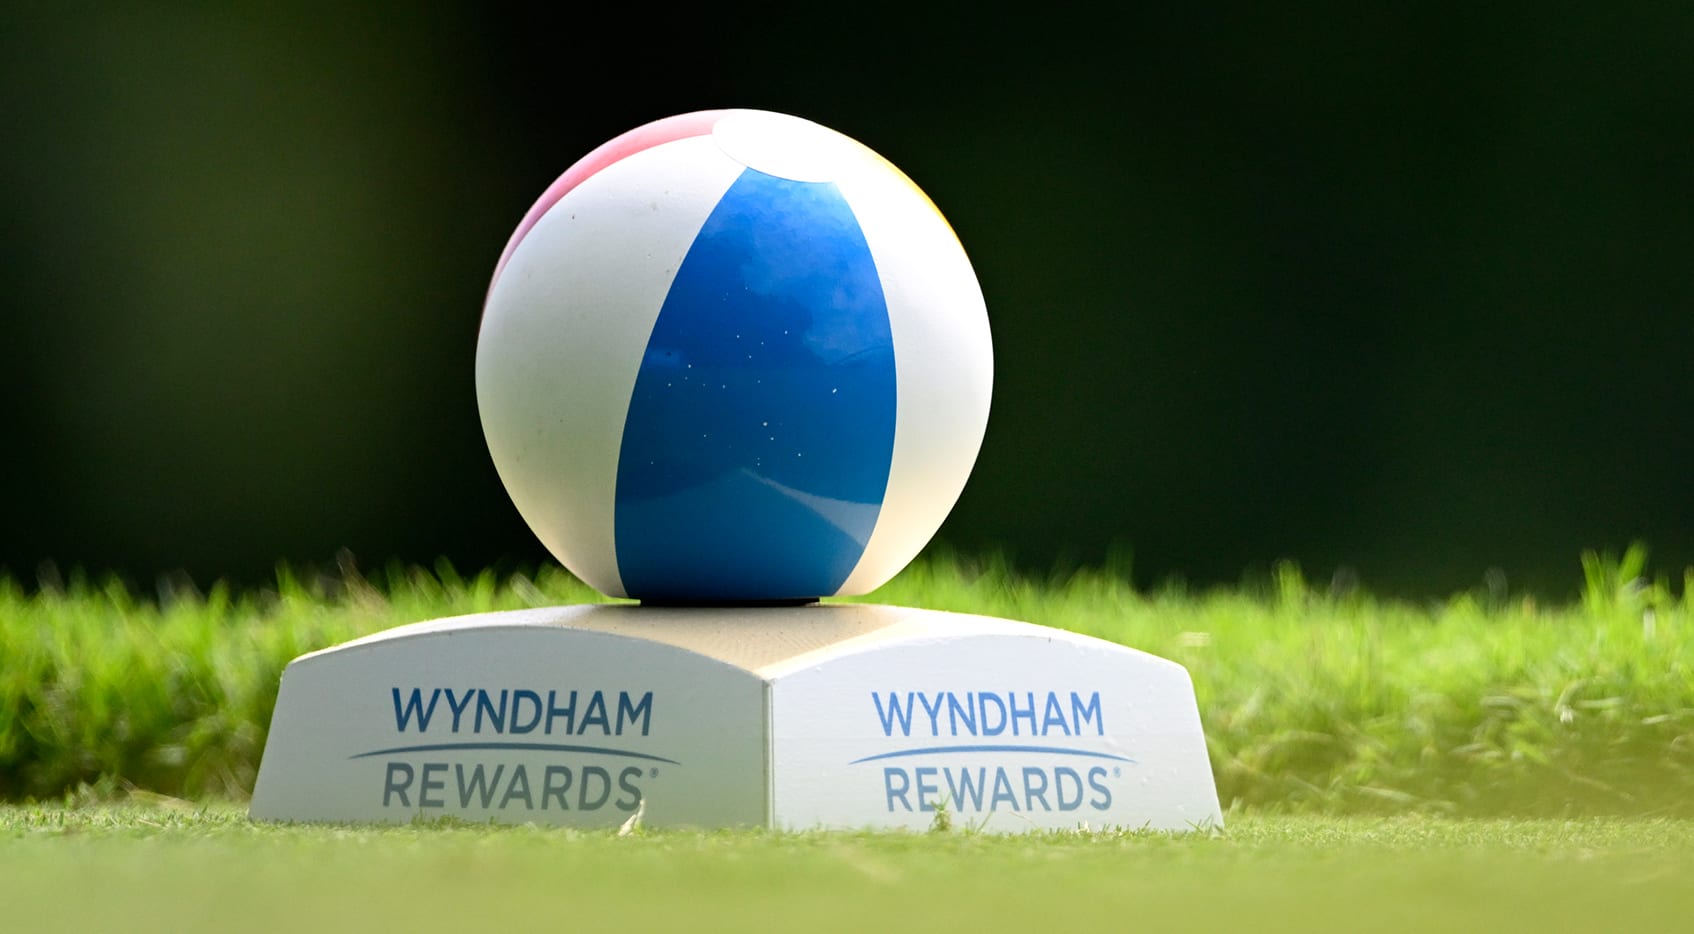 How to Watch the Wyndham Championship, Sunday Featured Groups, live scores, tee times, TV times